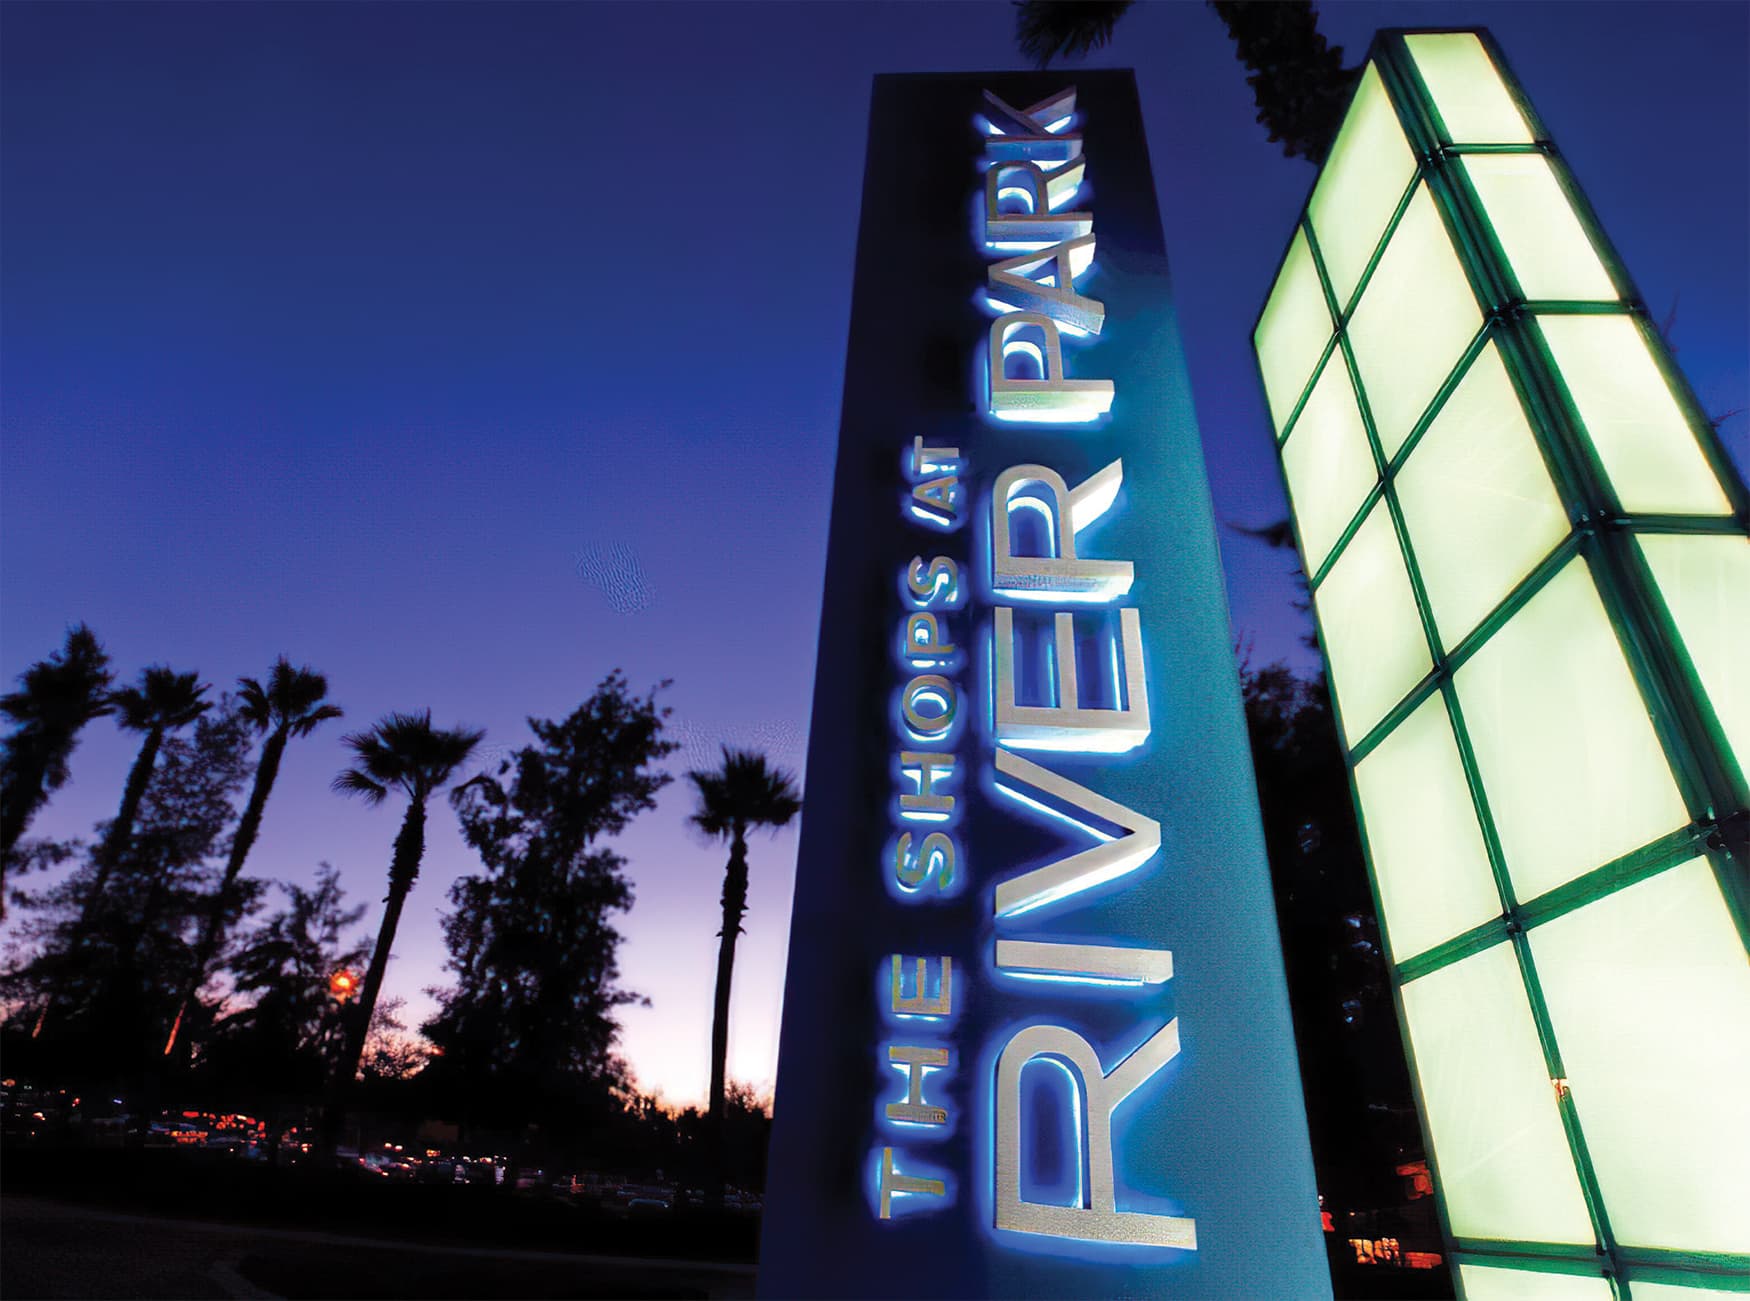 The Shops at River Park, a retail shopping center in Fresno, California. RSM Design prepared environmental graphic design services as well as wayfinding and placemaking elements. Project Identity Monument.